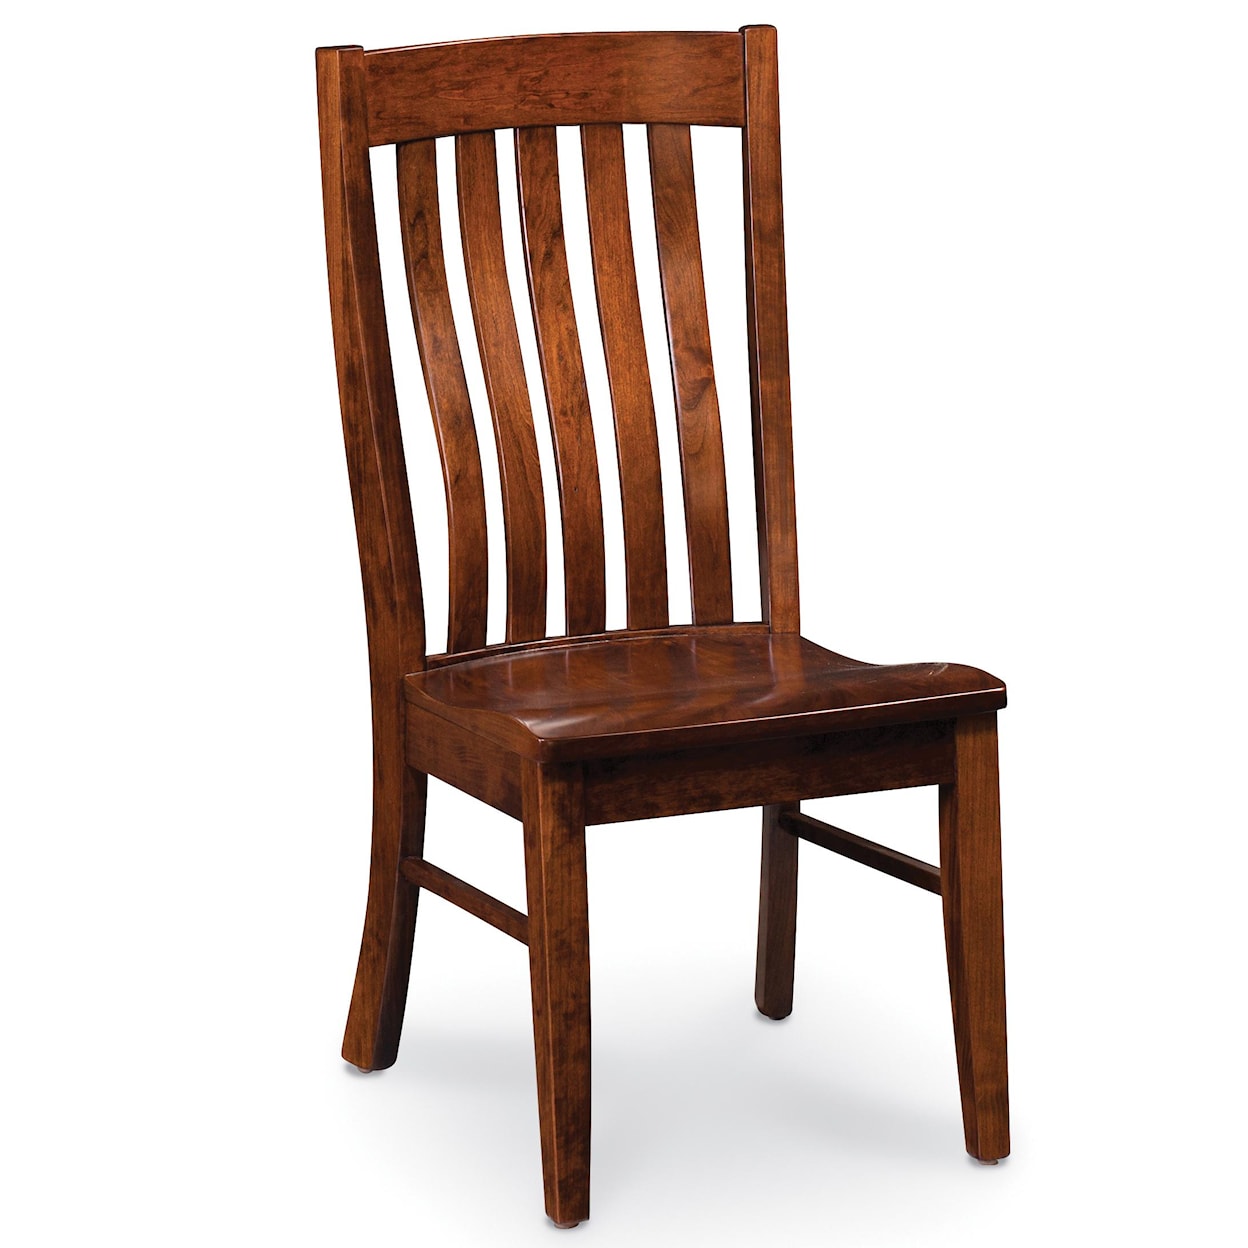 Simply Amish Chairs Bradford Side Chair